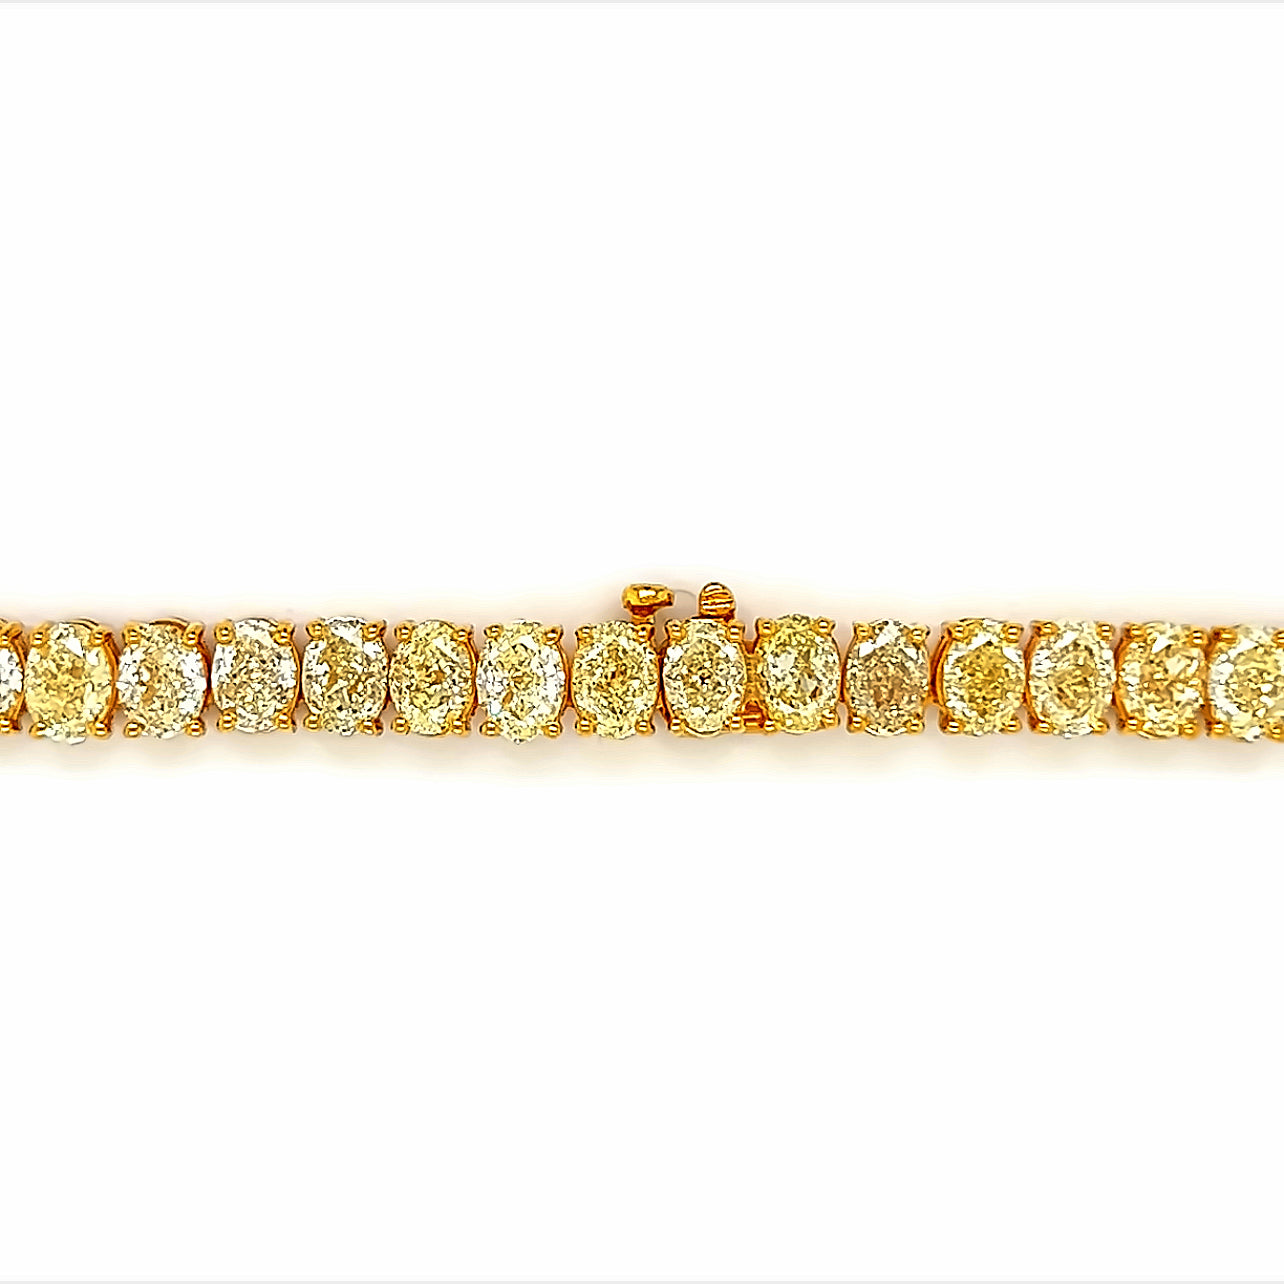 43.01 Cts Fancy Yellow Natural Diamond Oval Eternity Necklace